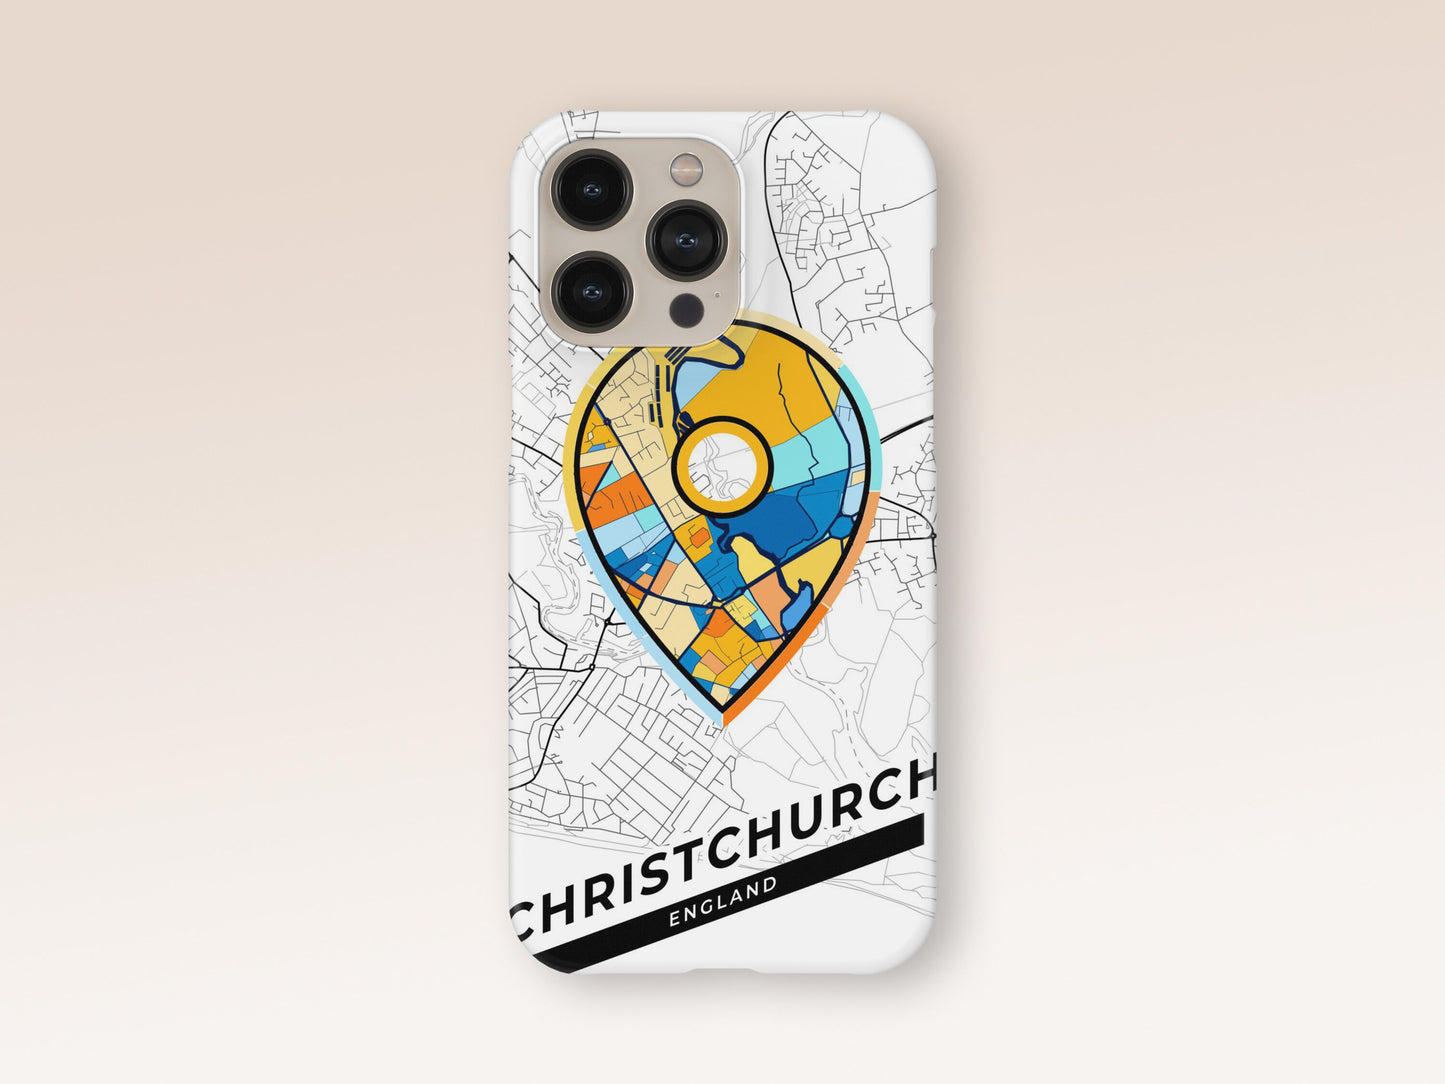 Christchurch England slim phone case with colorful icon. Birthday, wedding or housewarming gift. Couple match cases. 1